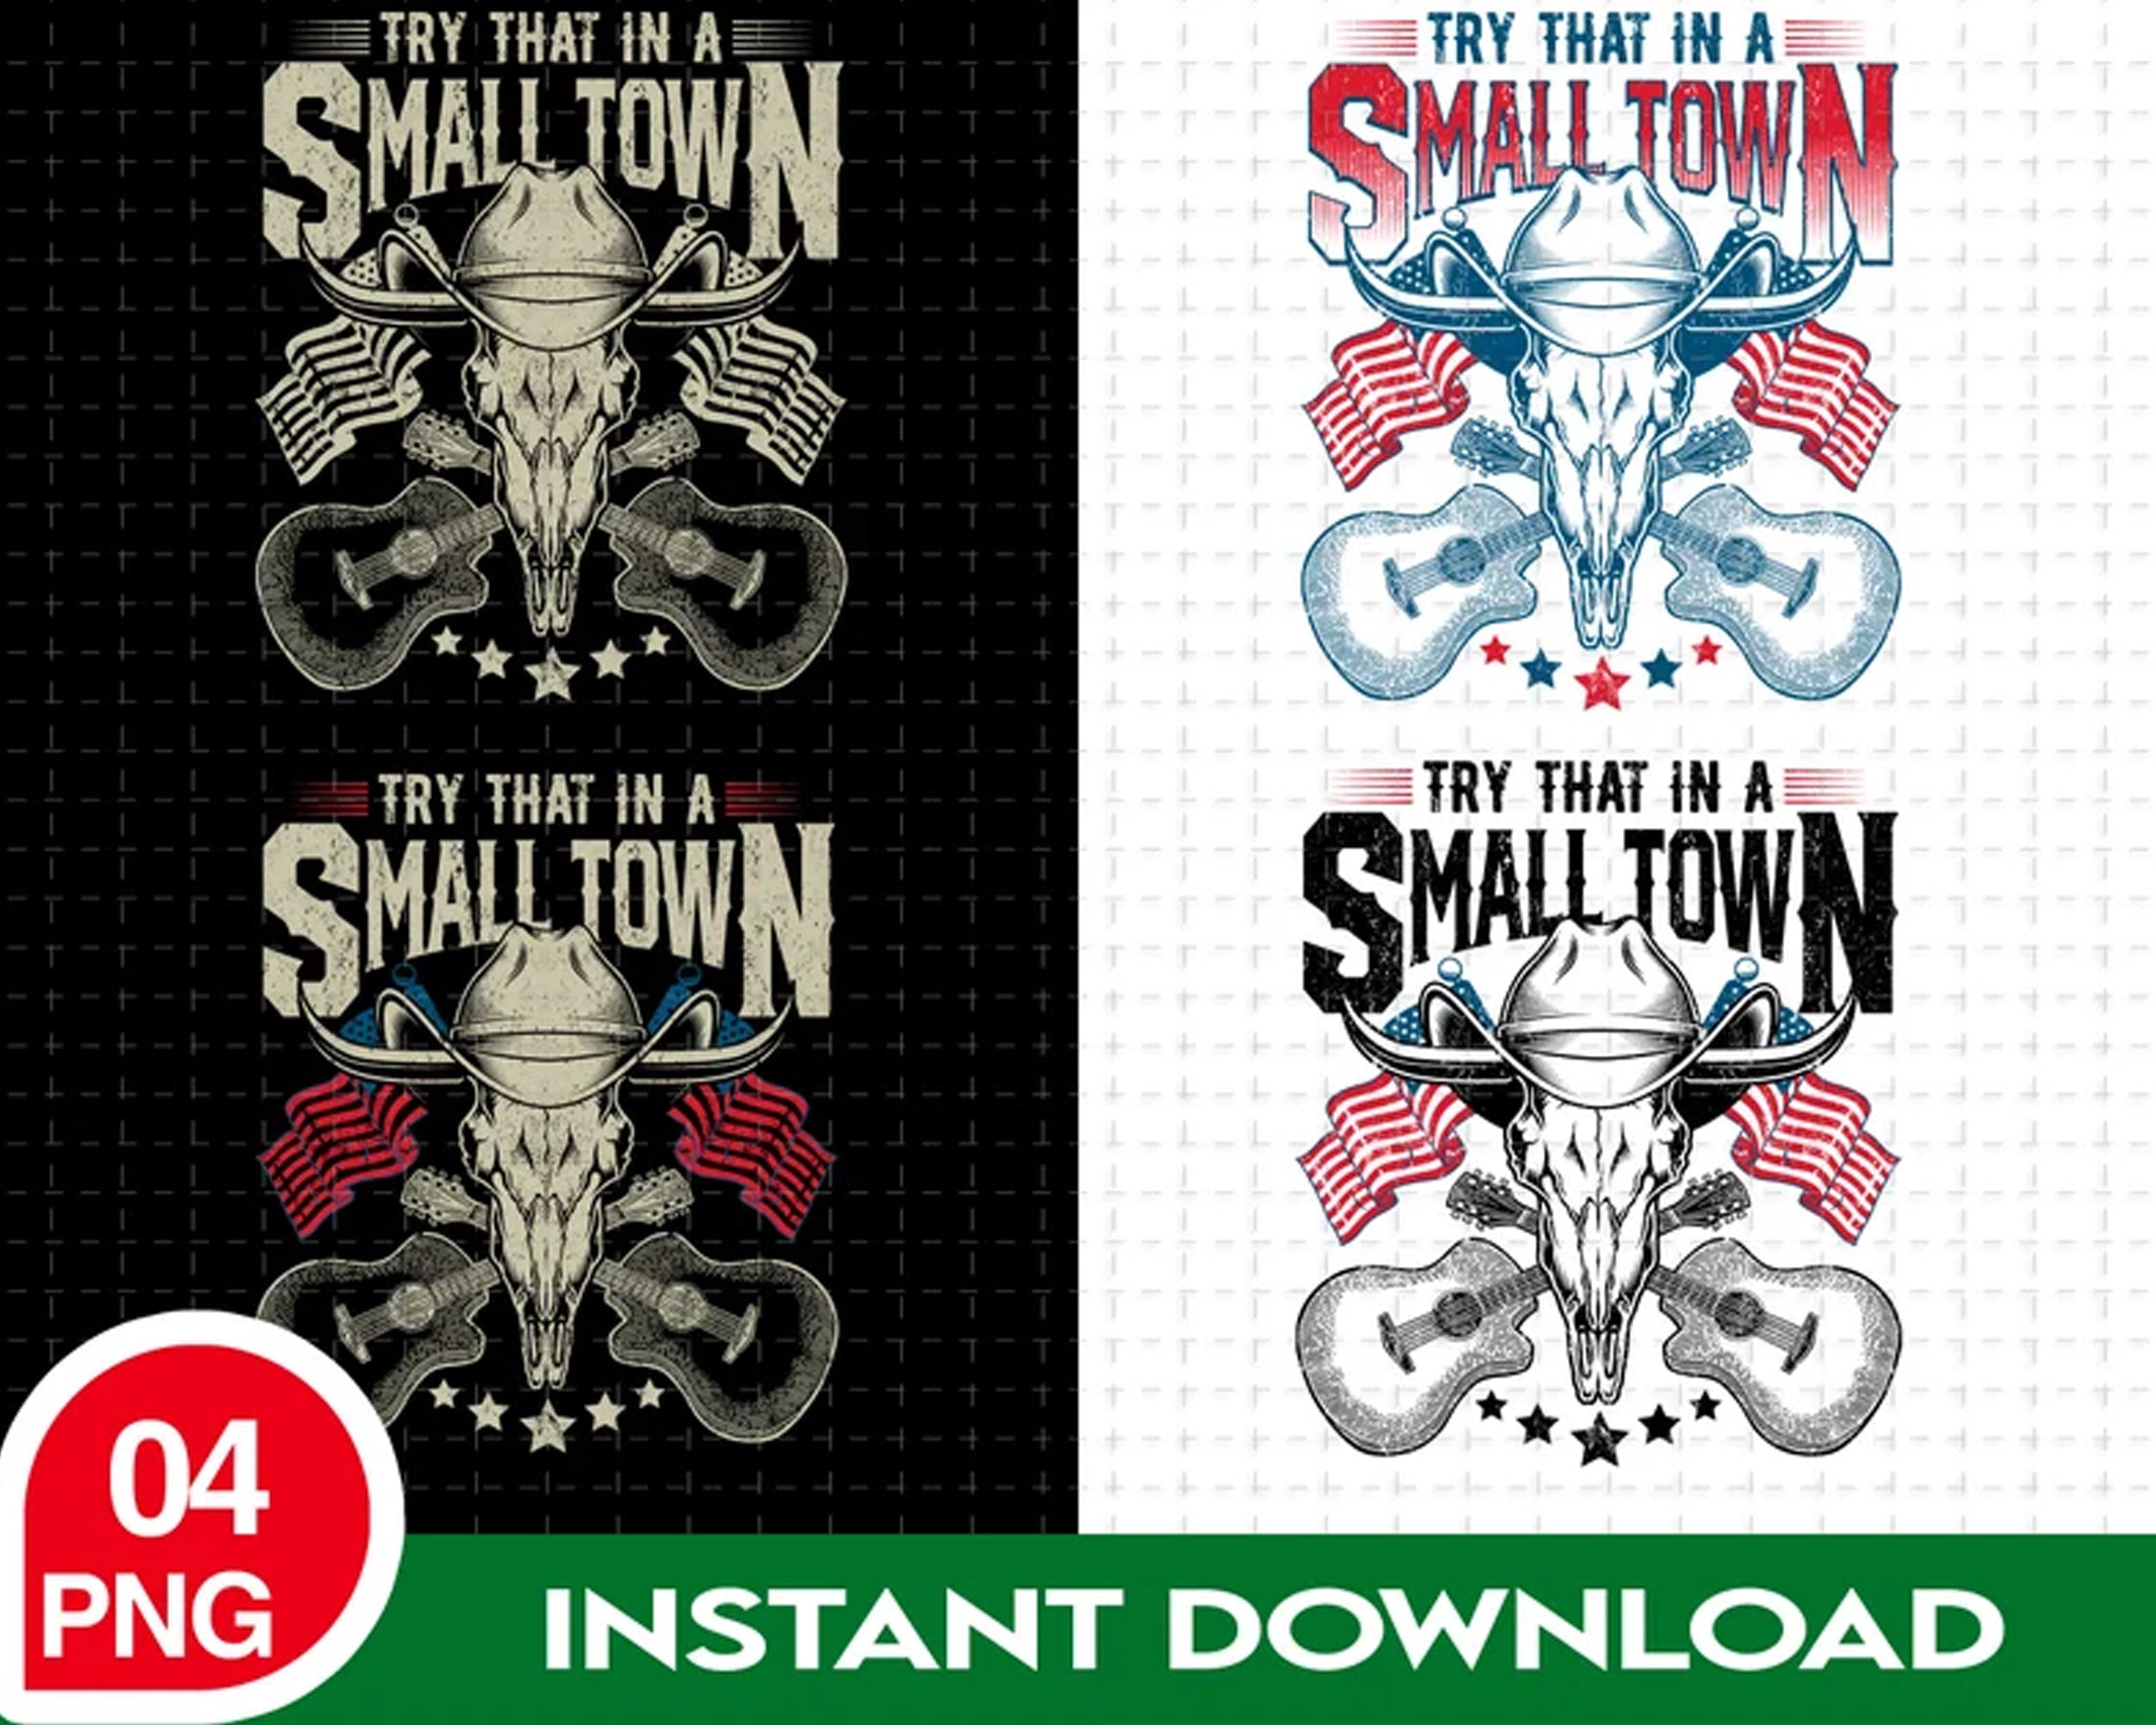 4 Try That In A Small Town Bundle png, Instant Download